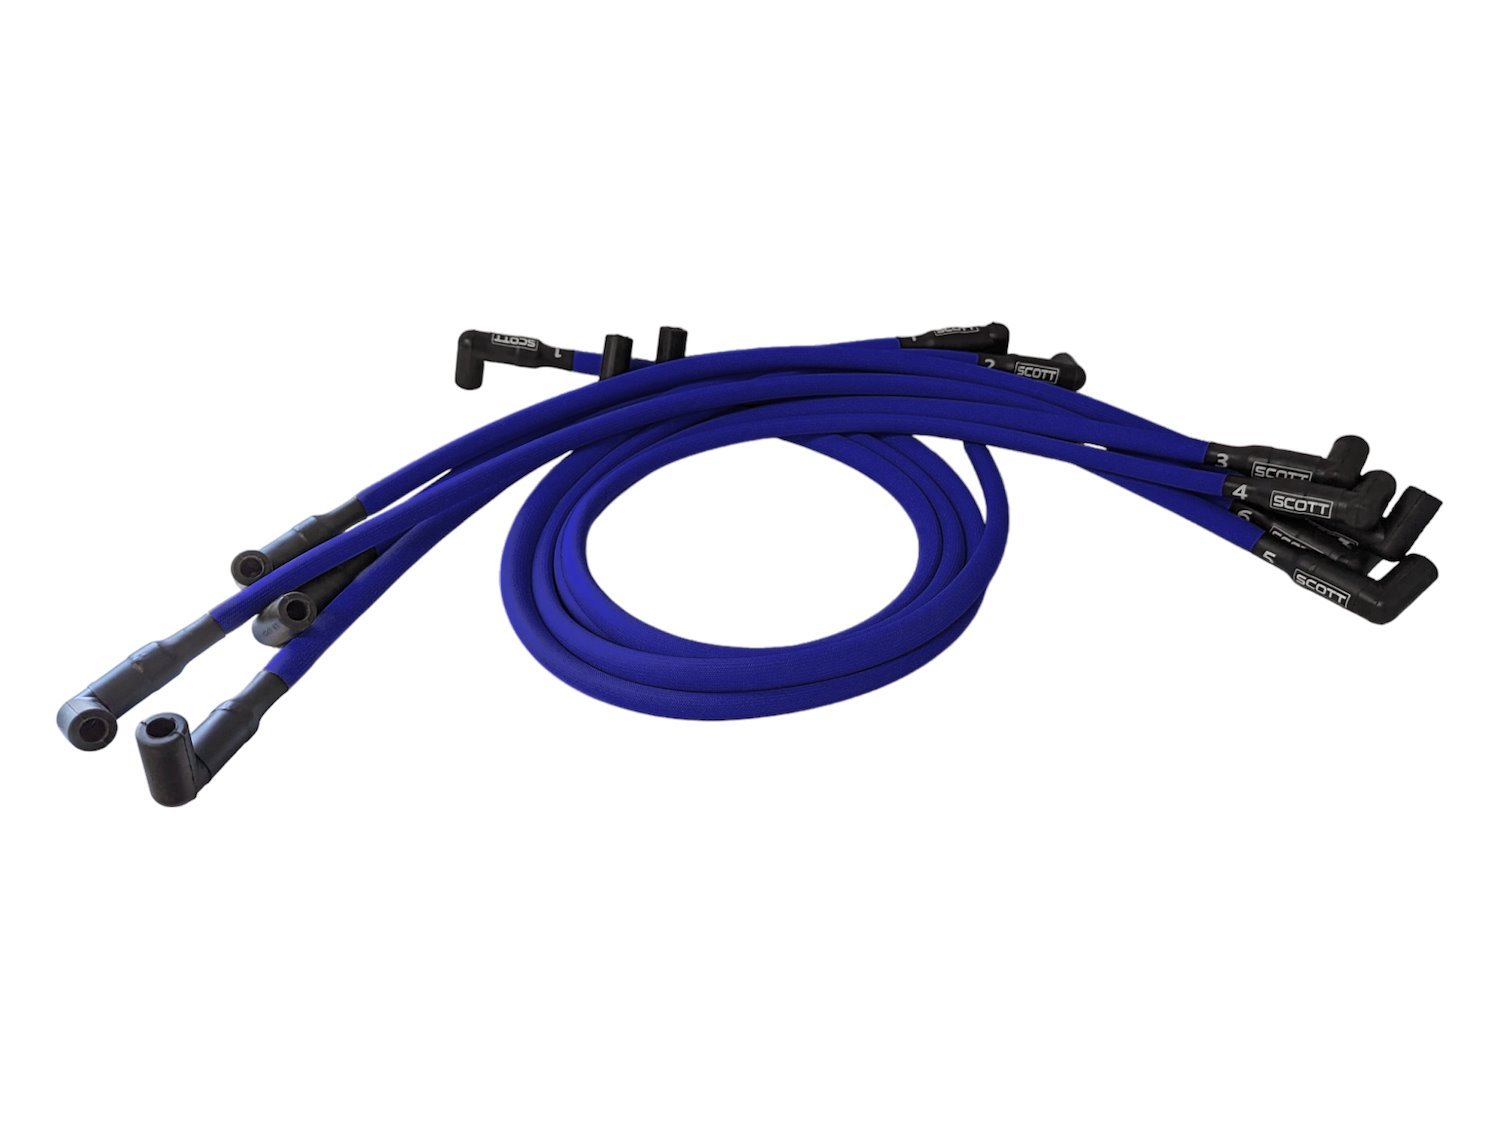 SPW300-PS-435-3 Super Mag Fiberglass-Oversleeved Spark Plug Wire Set for Small Block Chevy, Around Front [Blue]